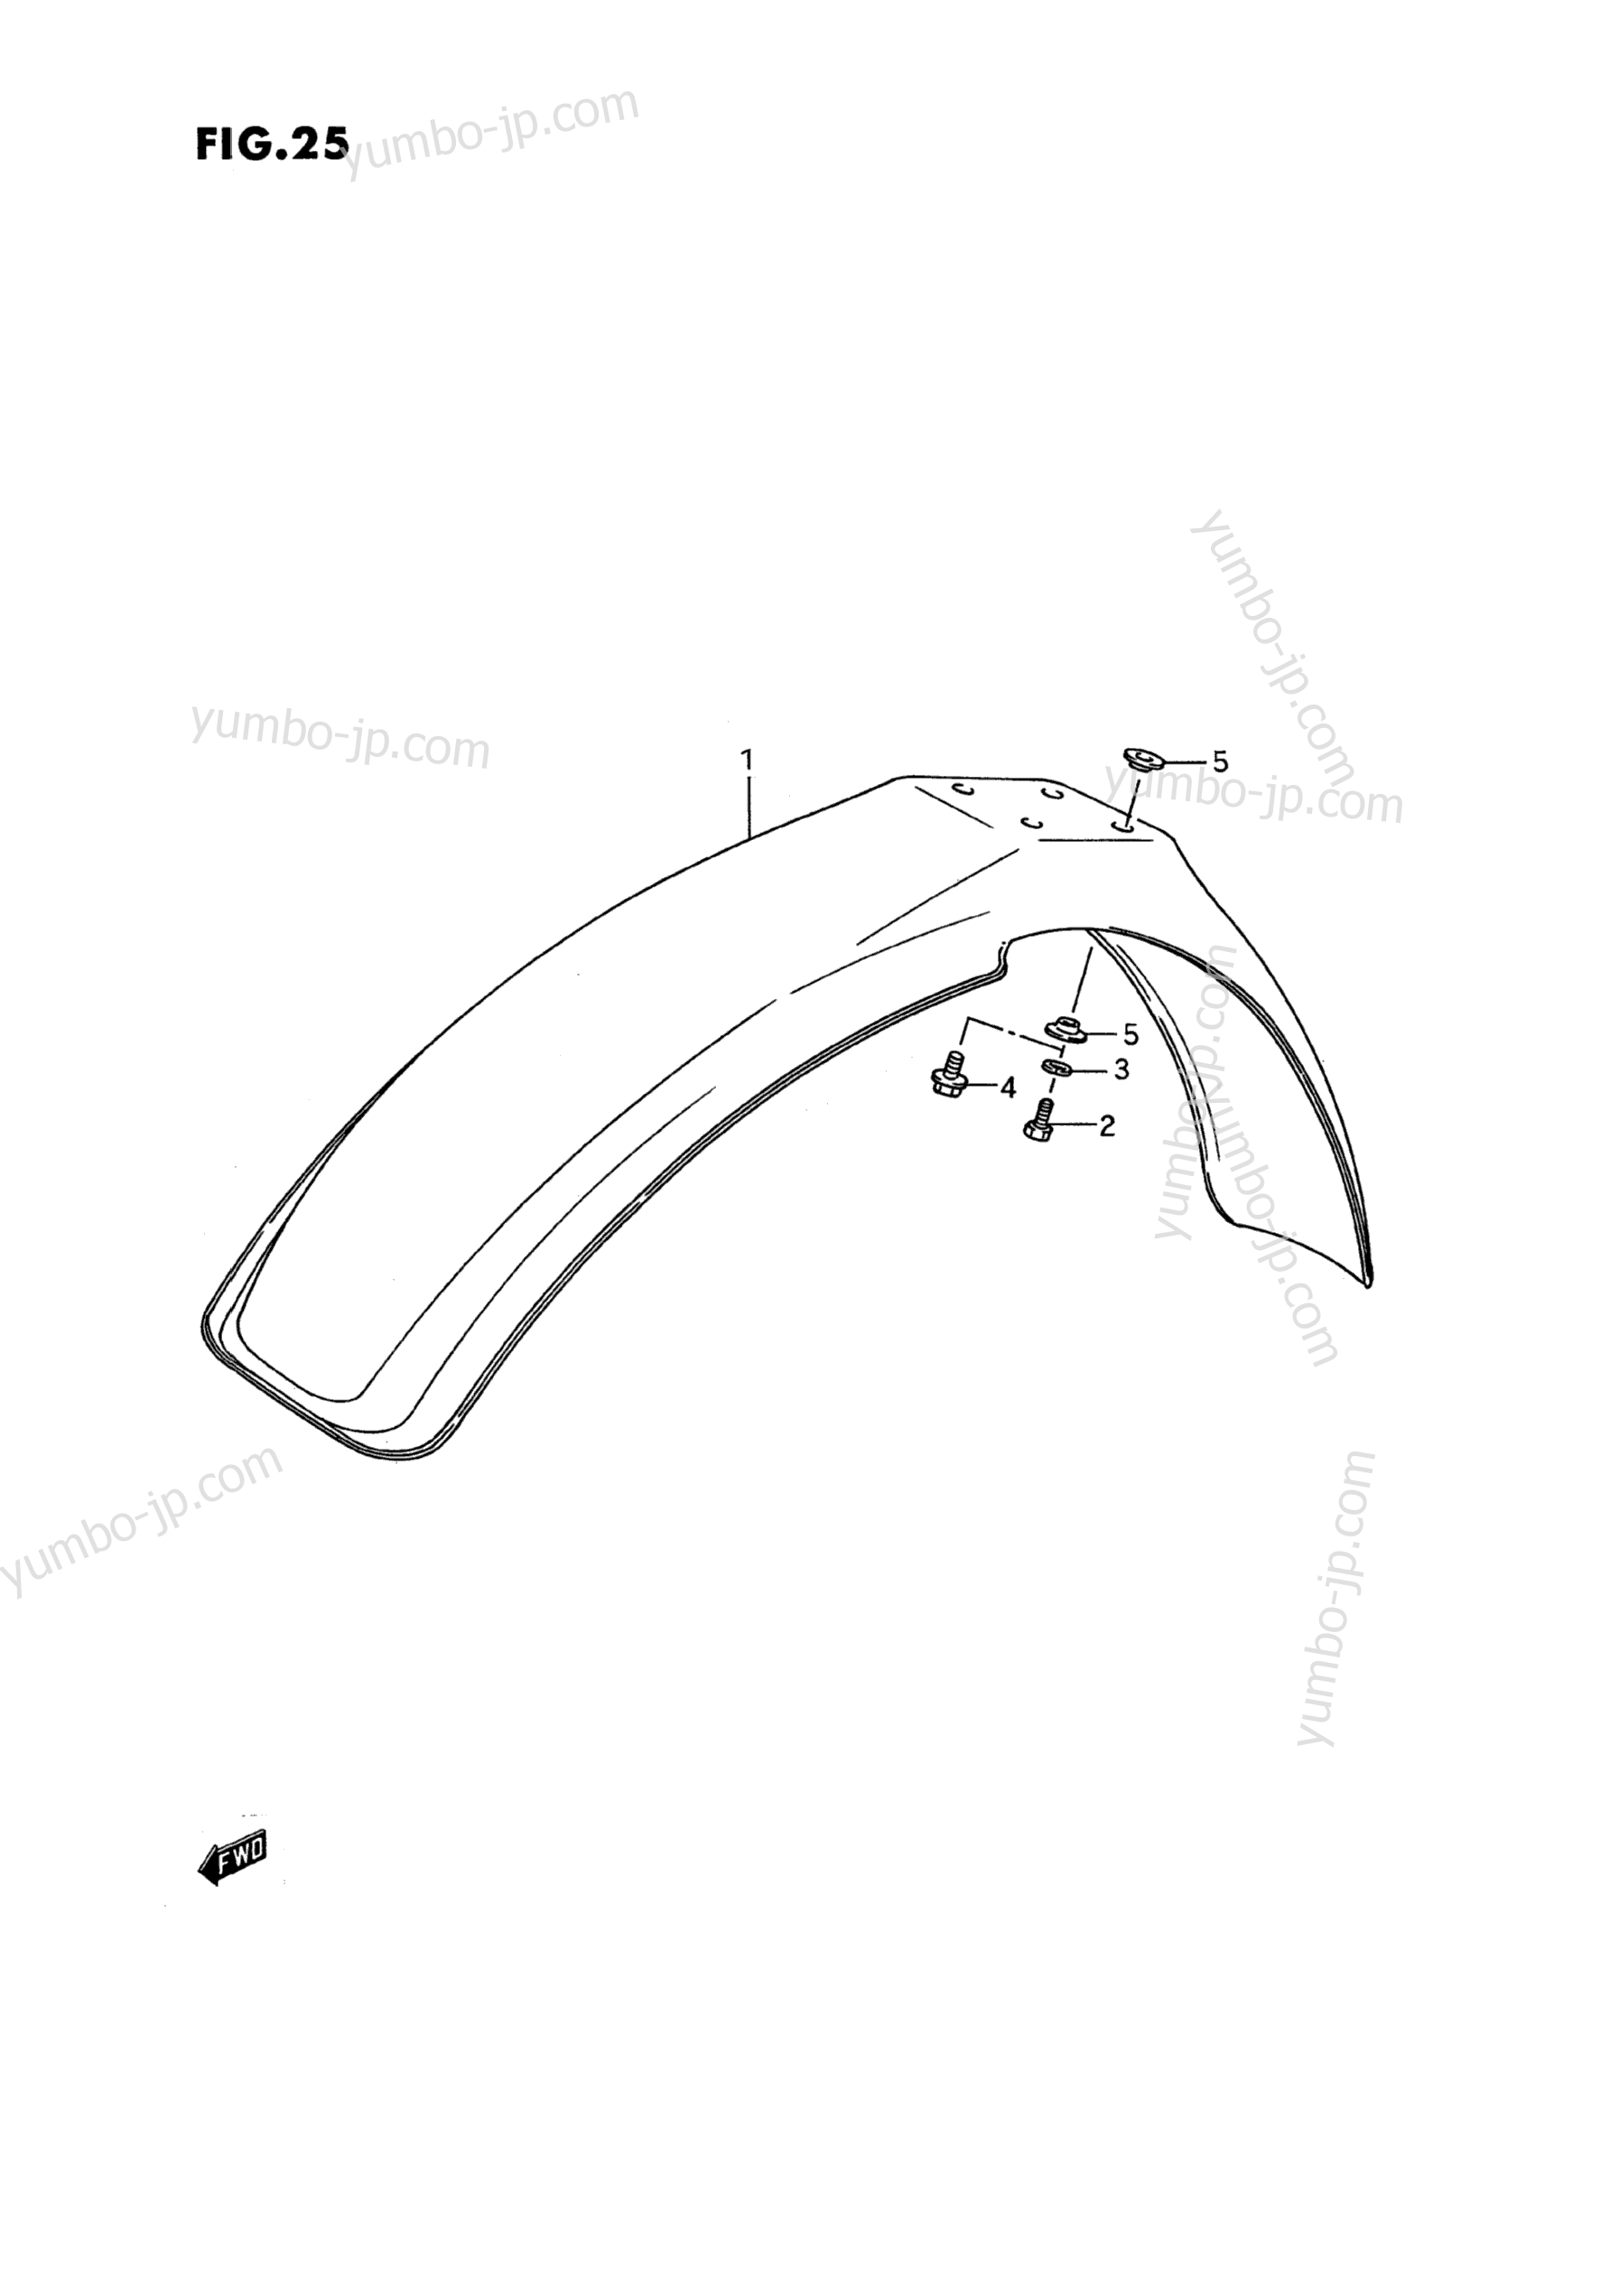 FRONT FENDER for motorcycles SUZUKI RM80 1989 year